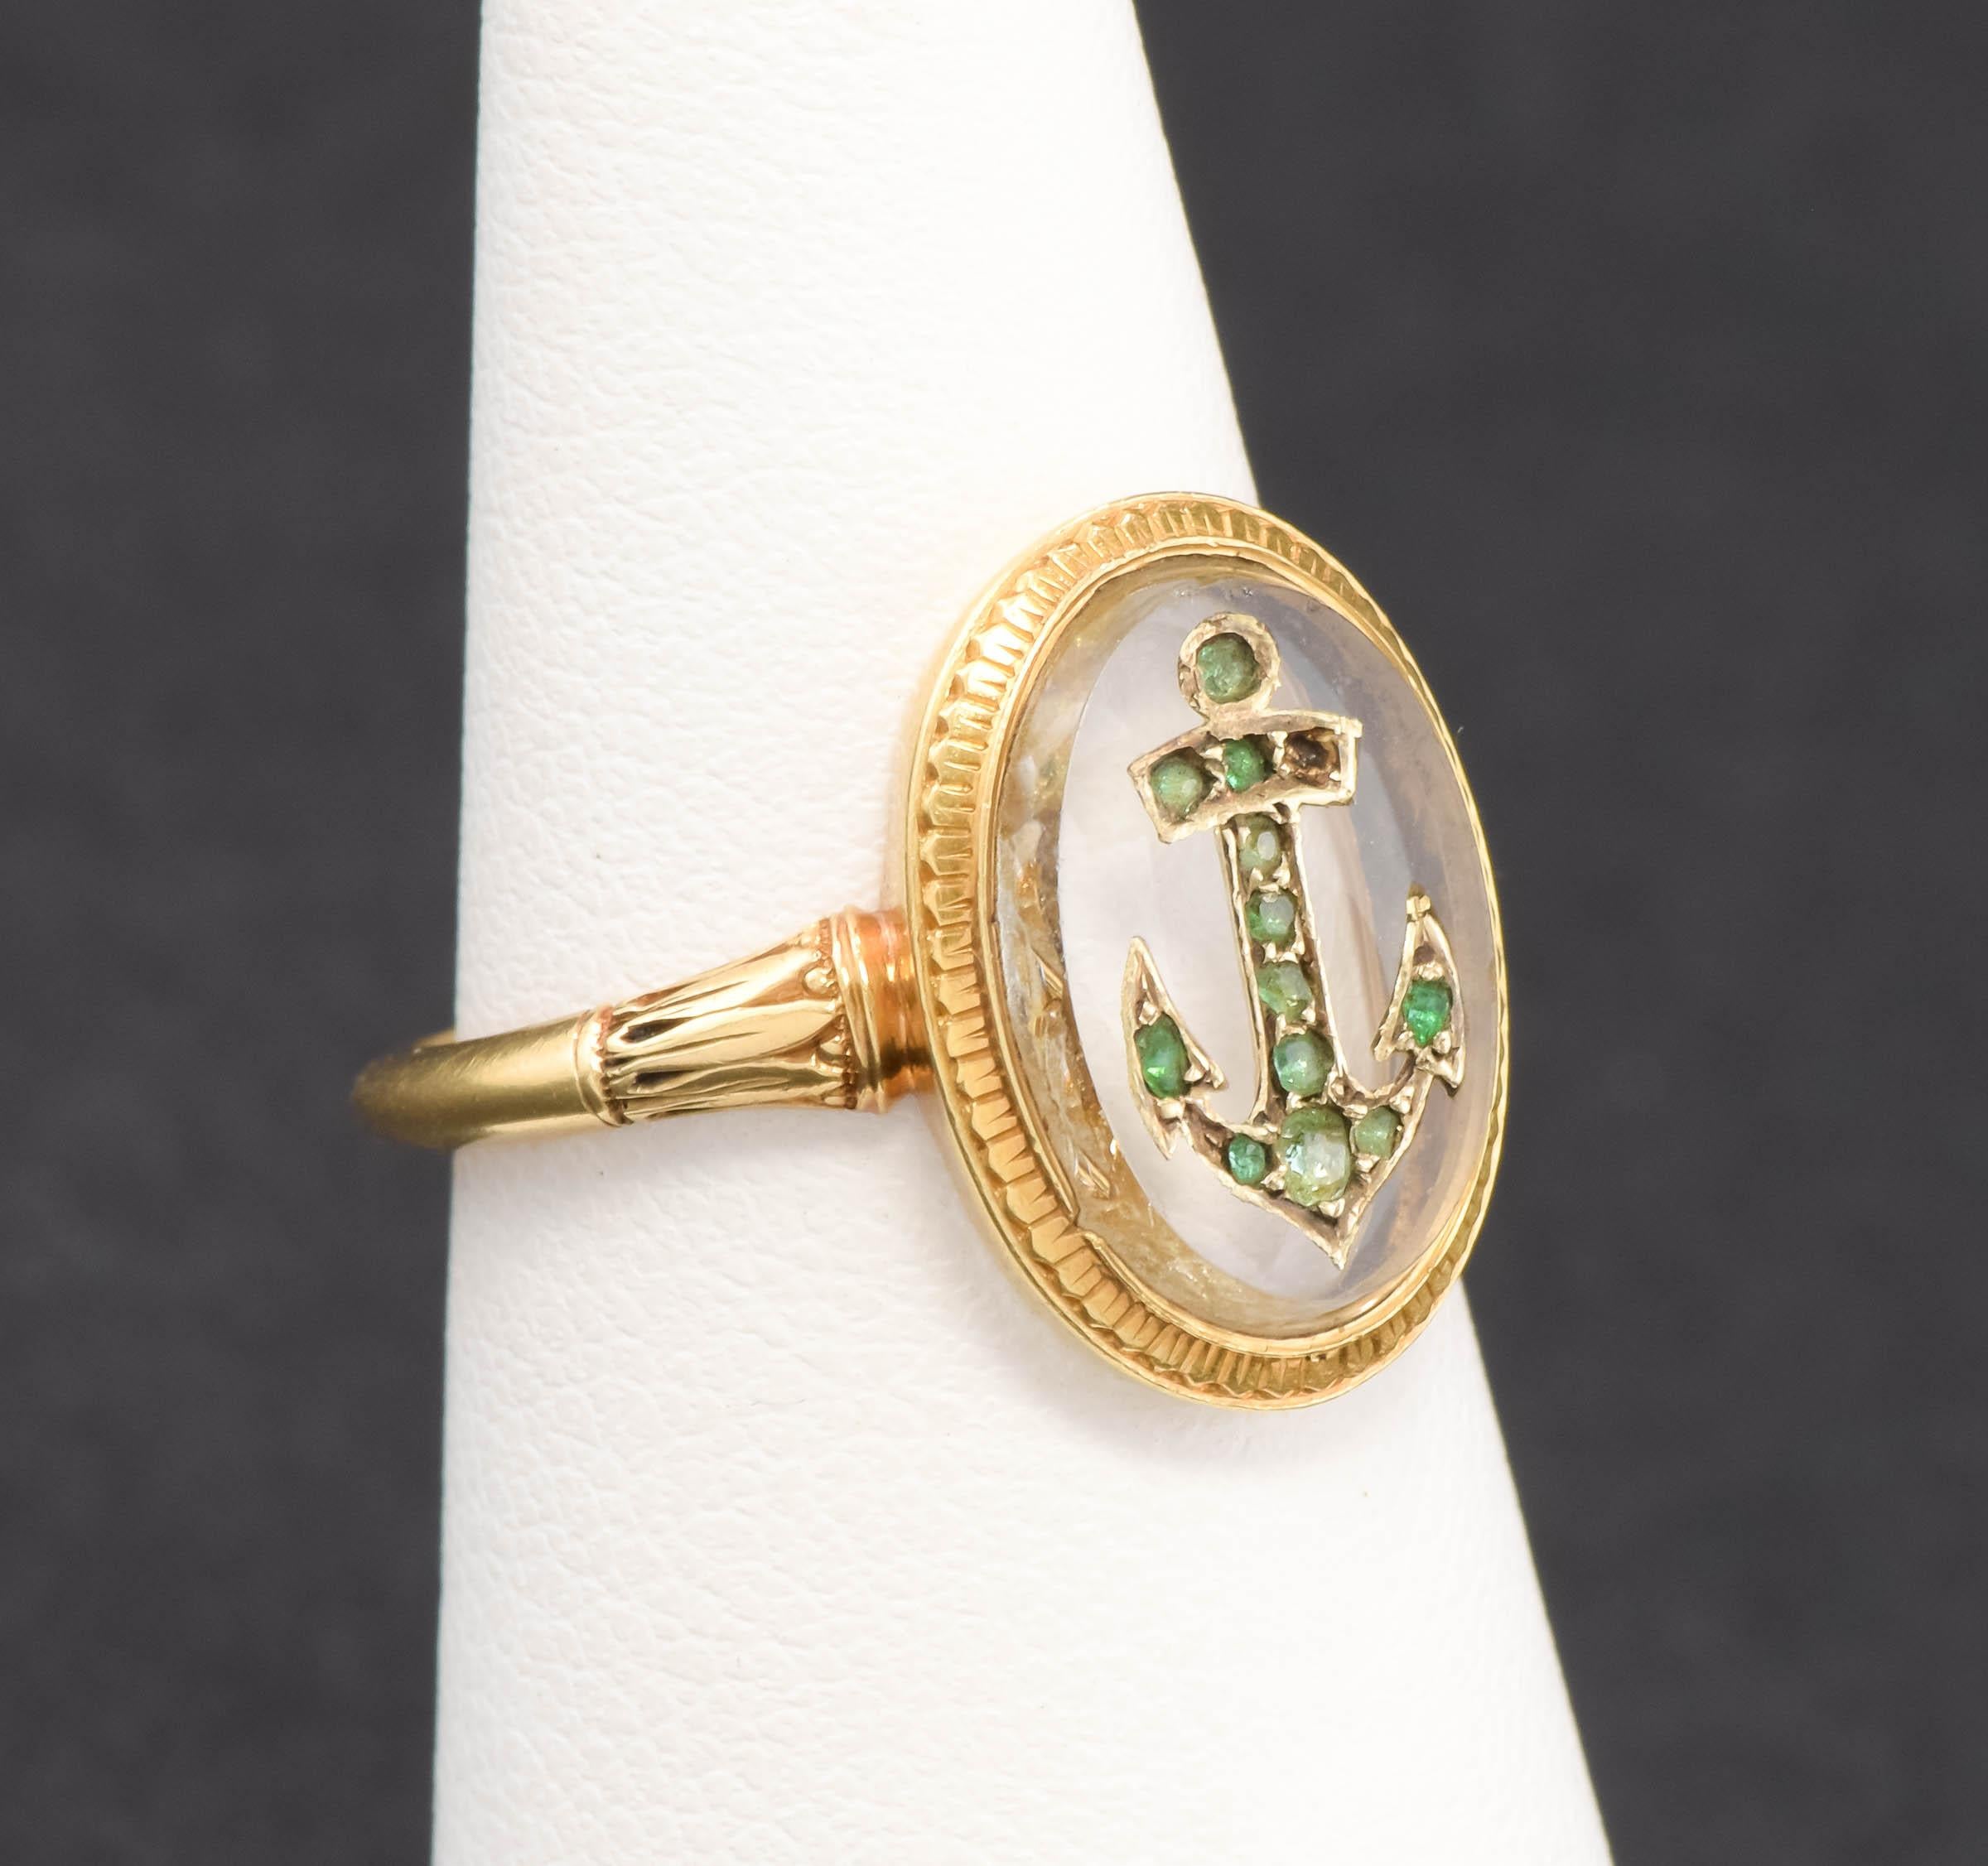 Offered is a very special and unique Victorian period gold ring featuring a Rock Crystal plaque inset with an Anchor design studded with old emeralds. 

(Please note that one emerald is currently missing as shown in my macro photos.  I have arranged